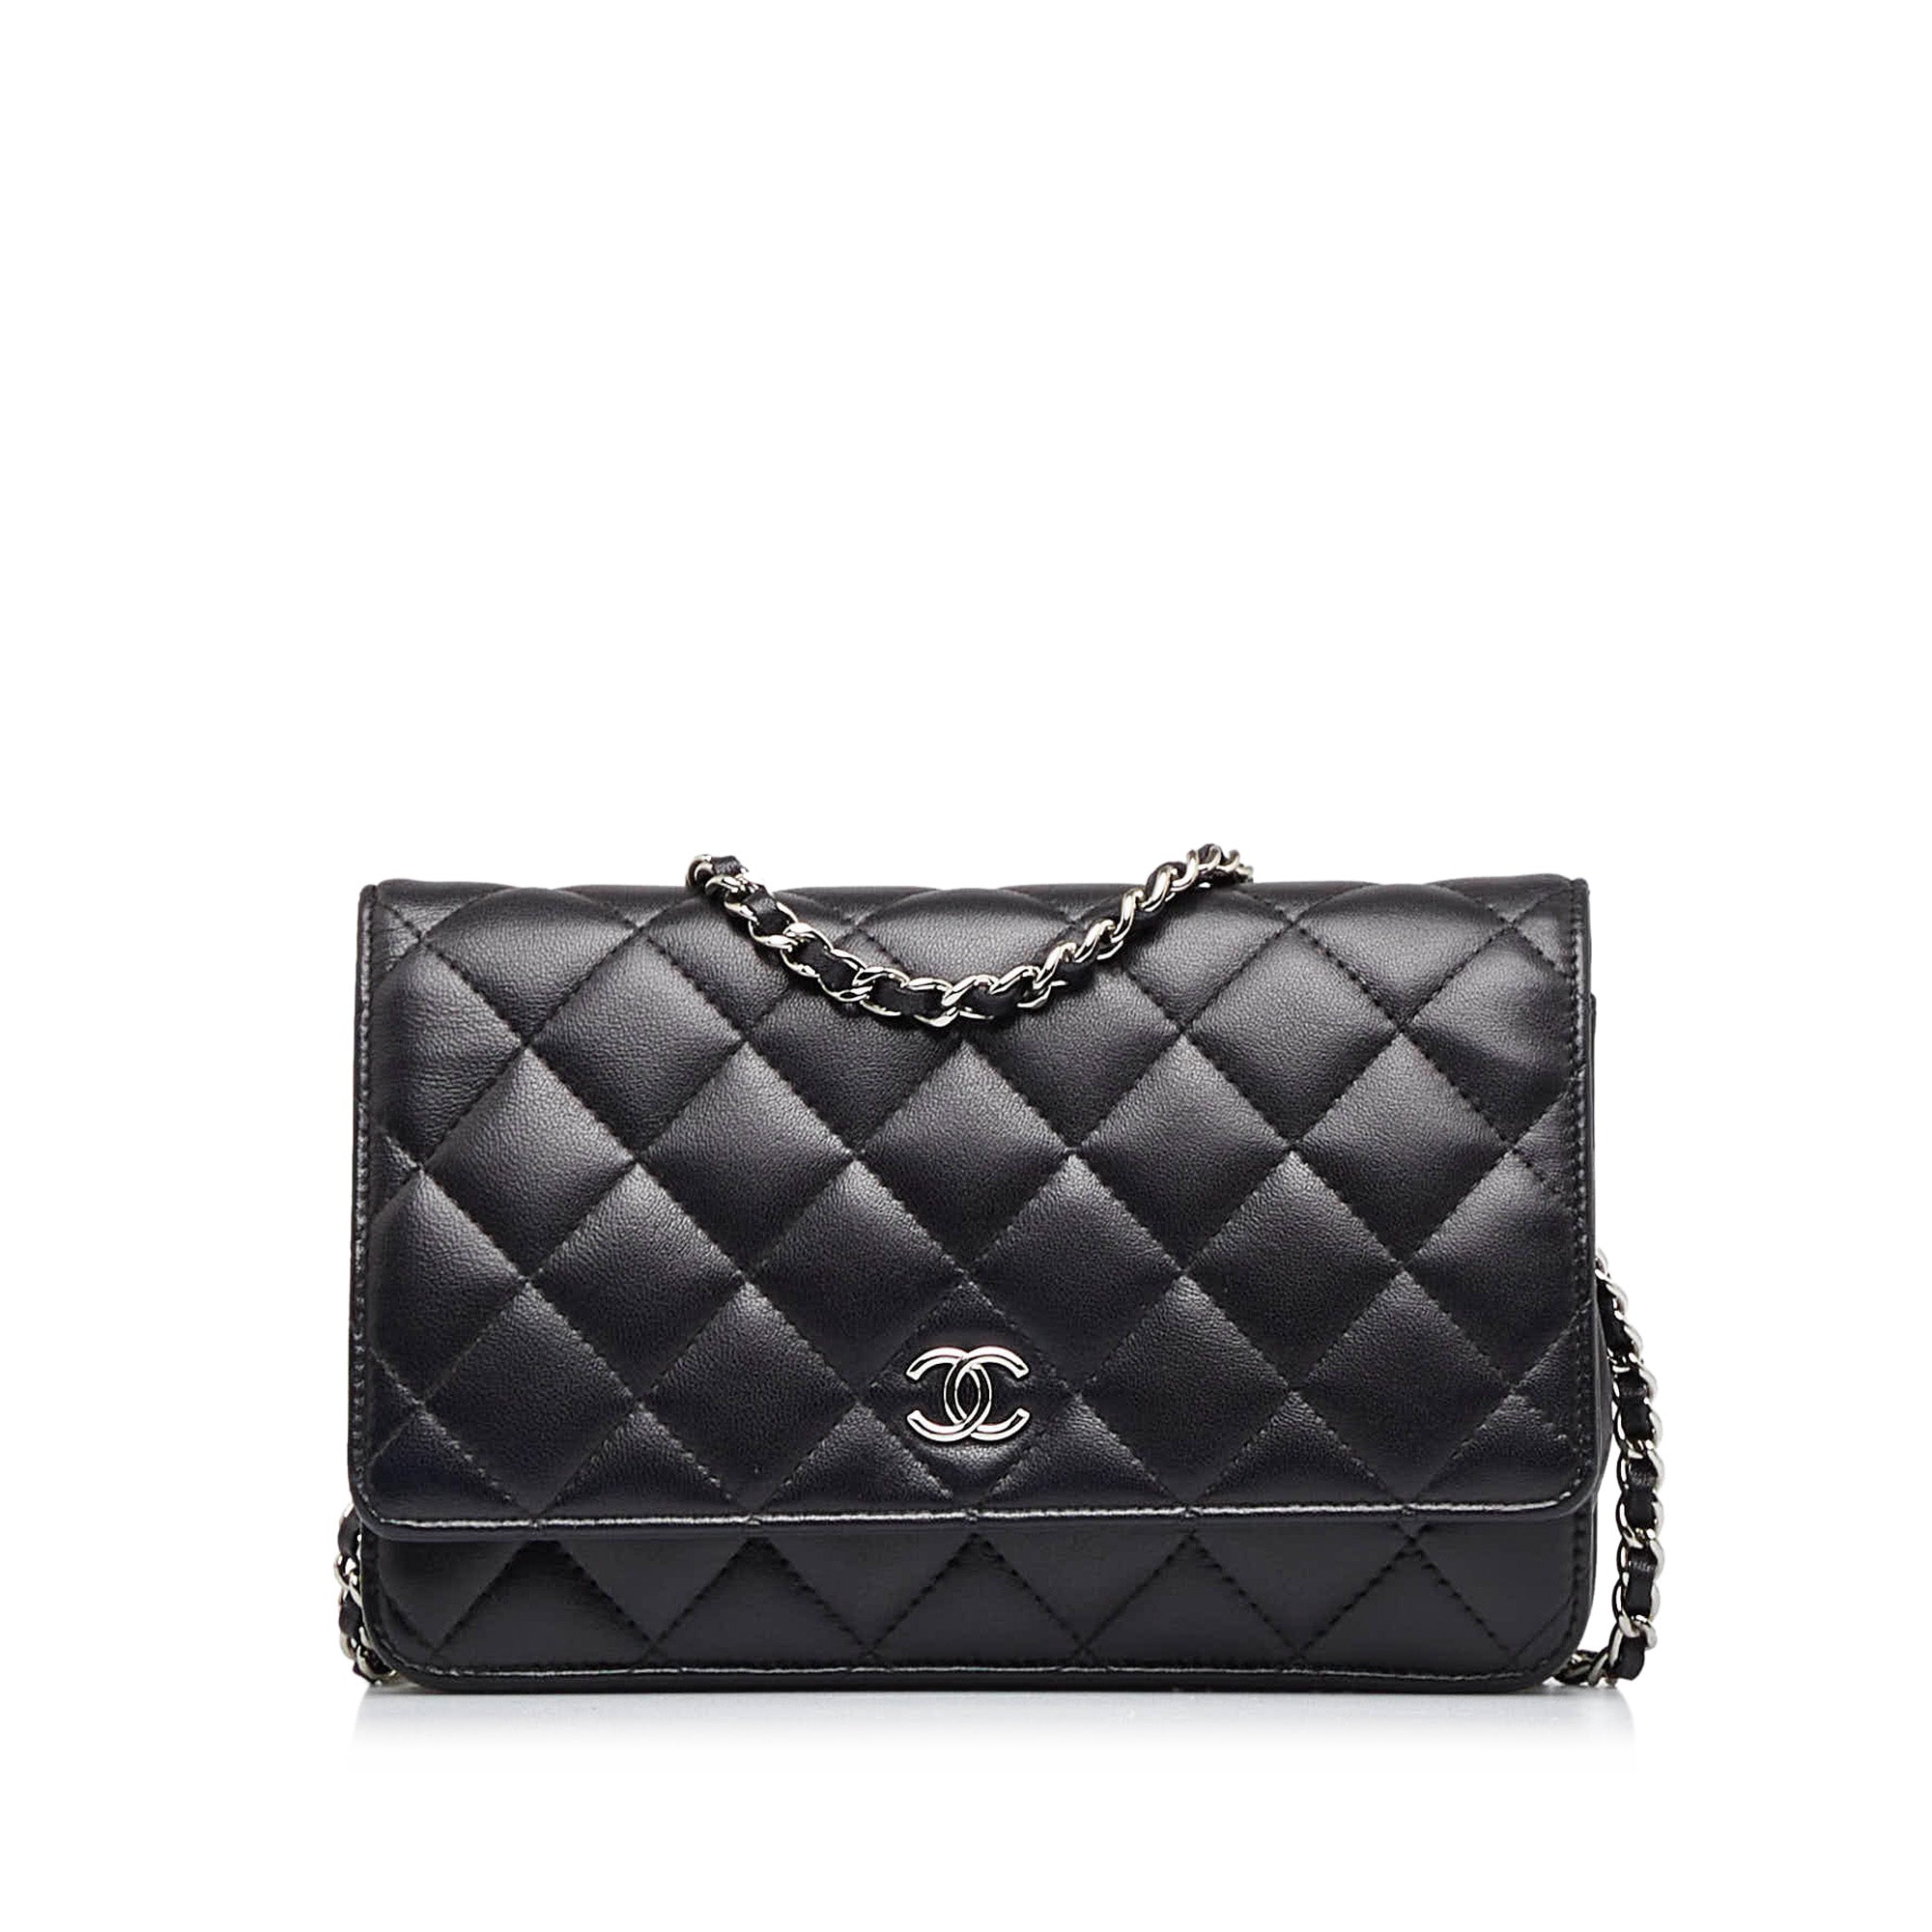 Chanel Mini Timeless handbag in red quilted leather